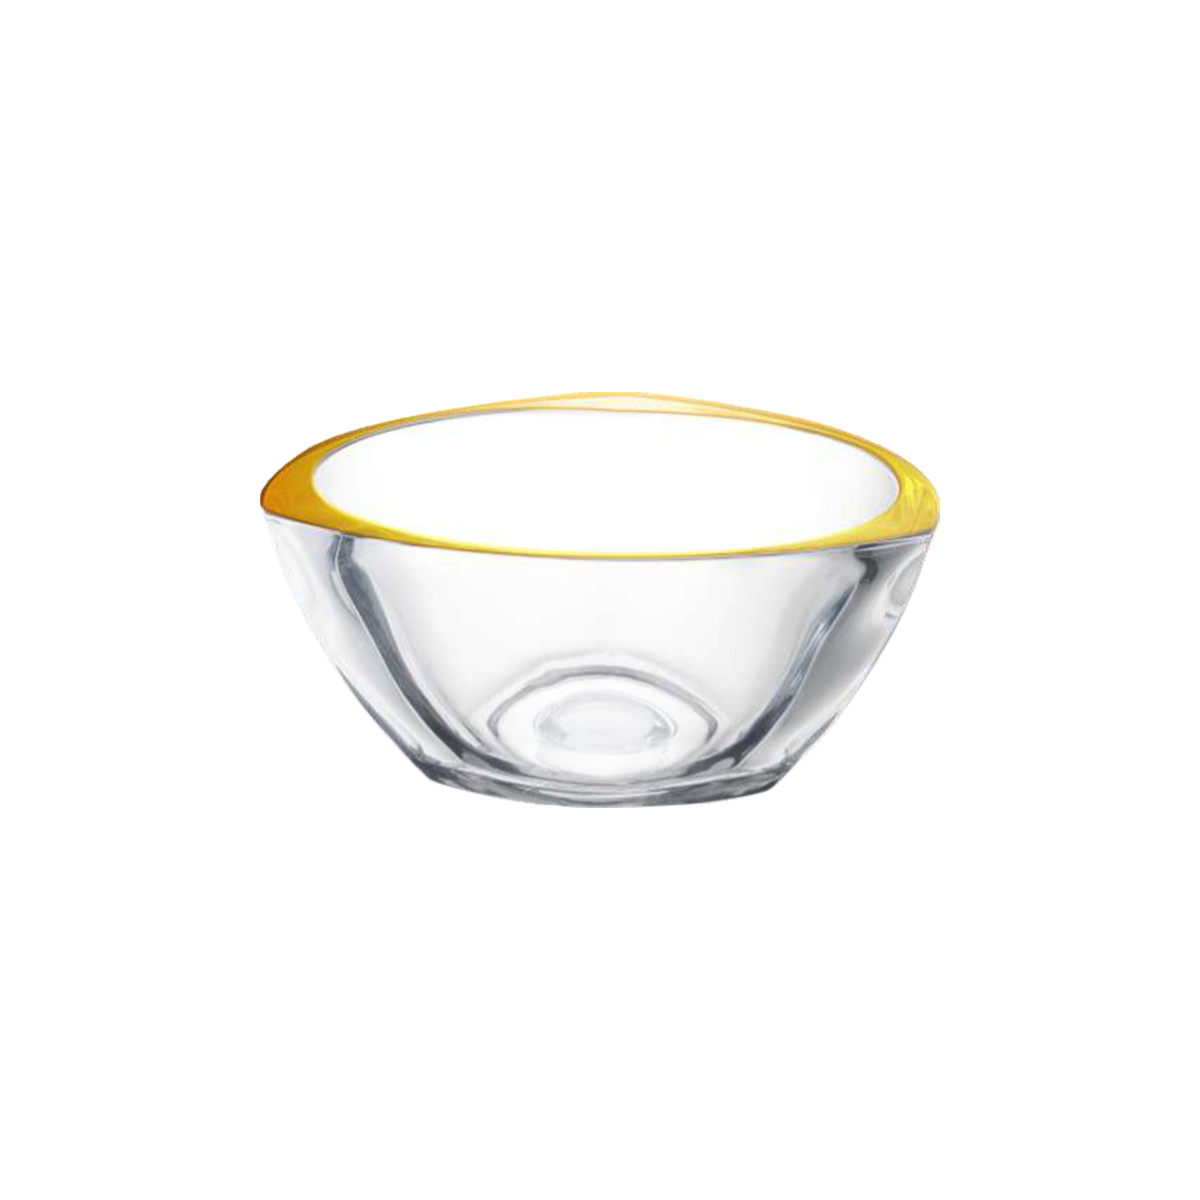 JH GLASSWARE Glass Fruit Bowl With Gold Rim